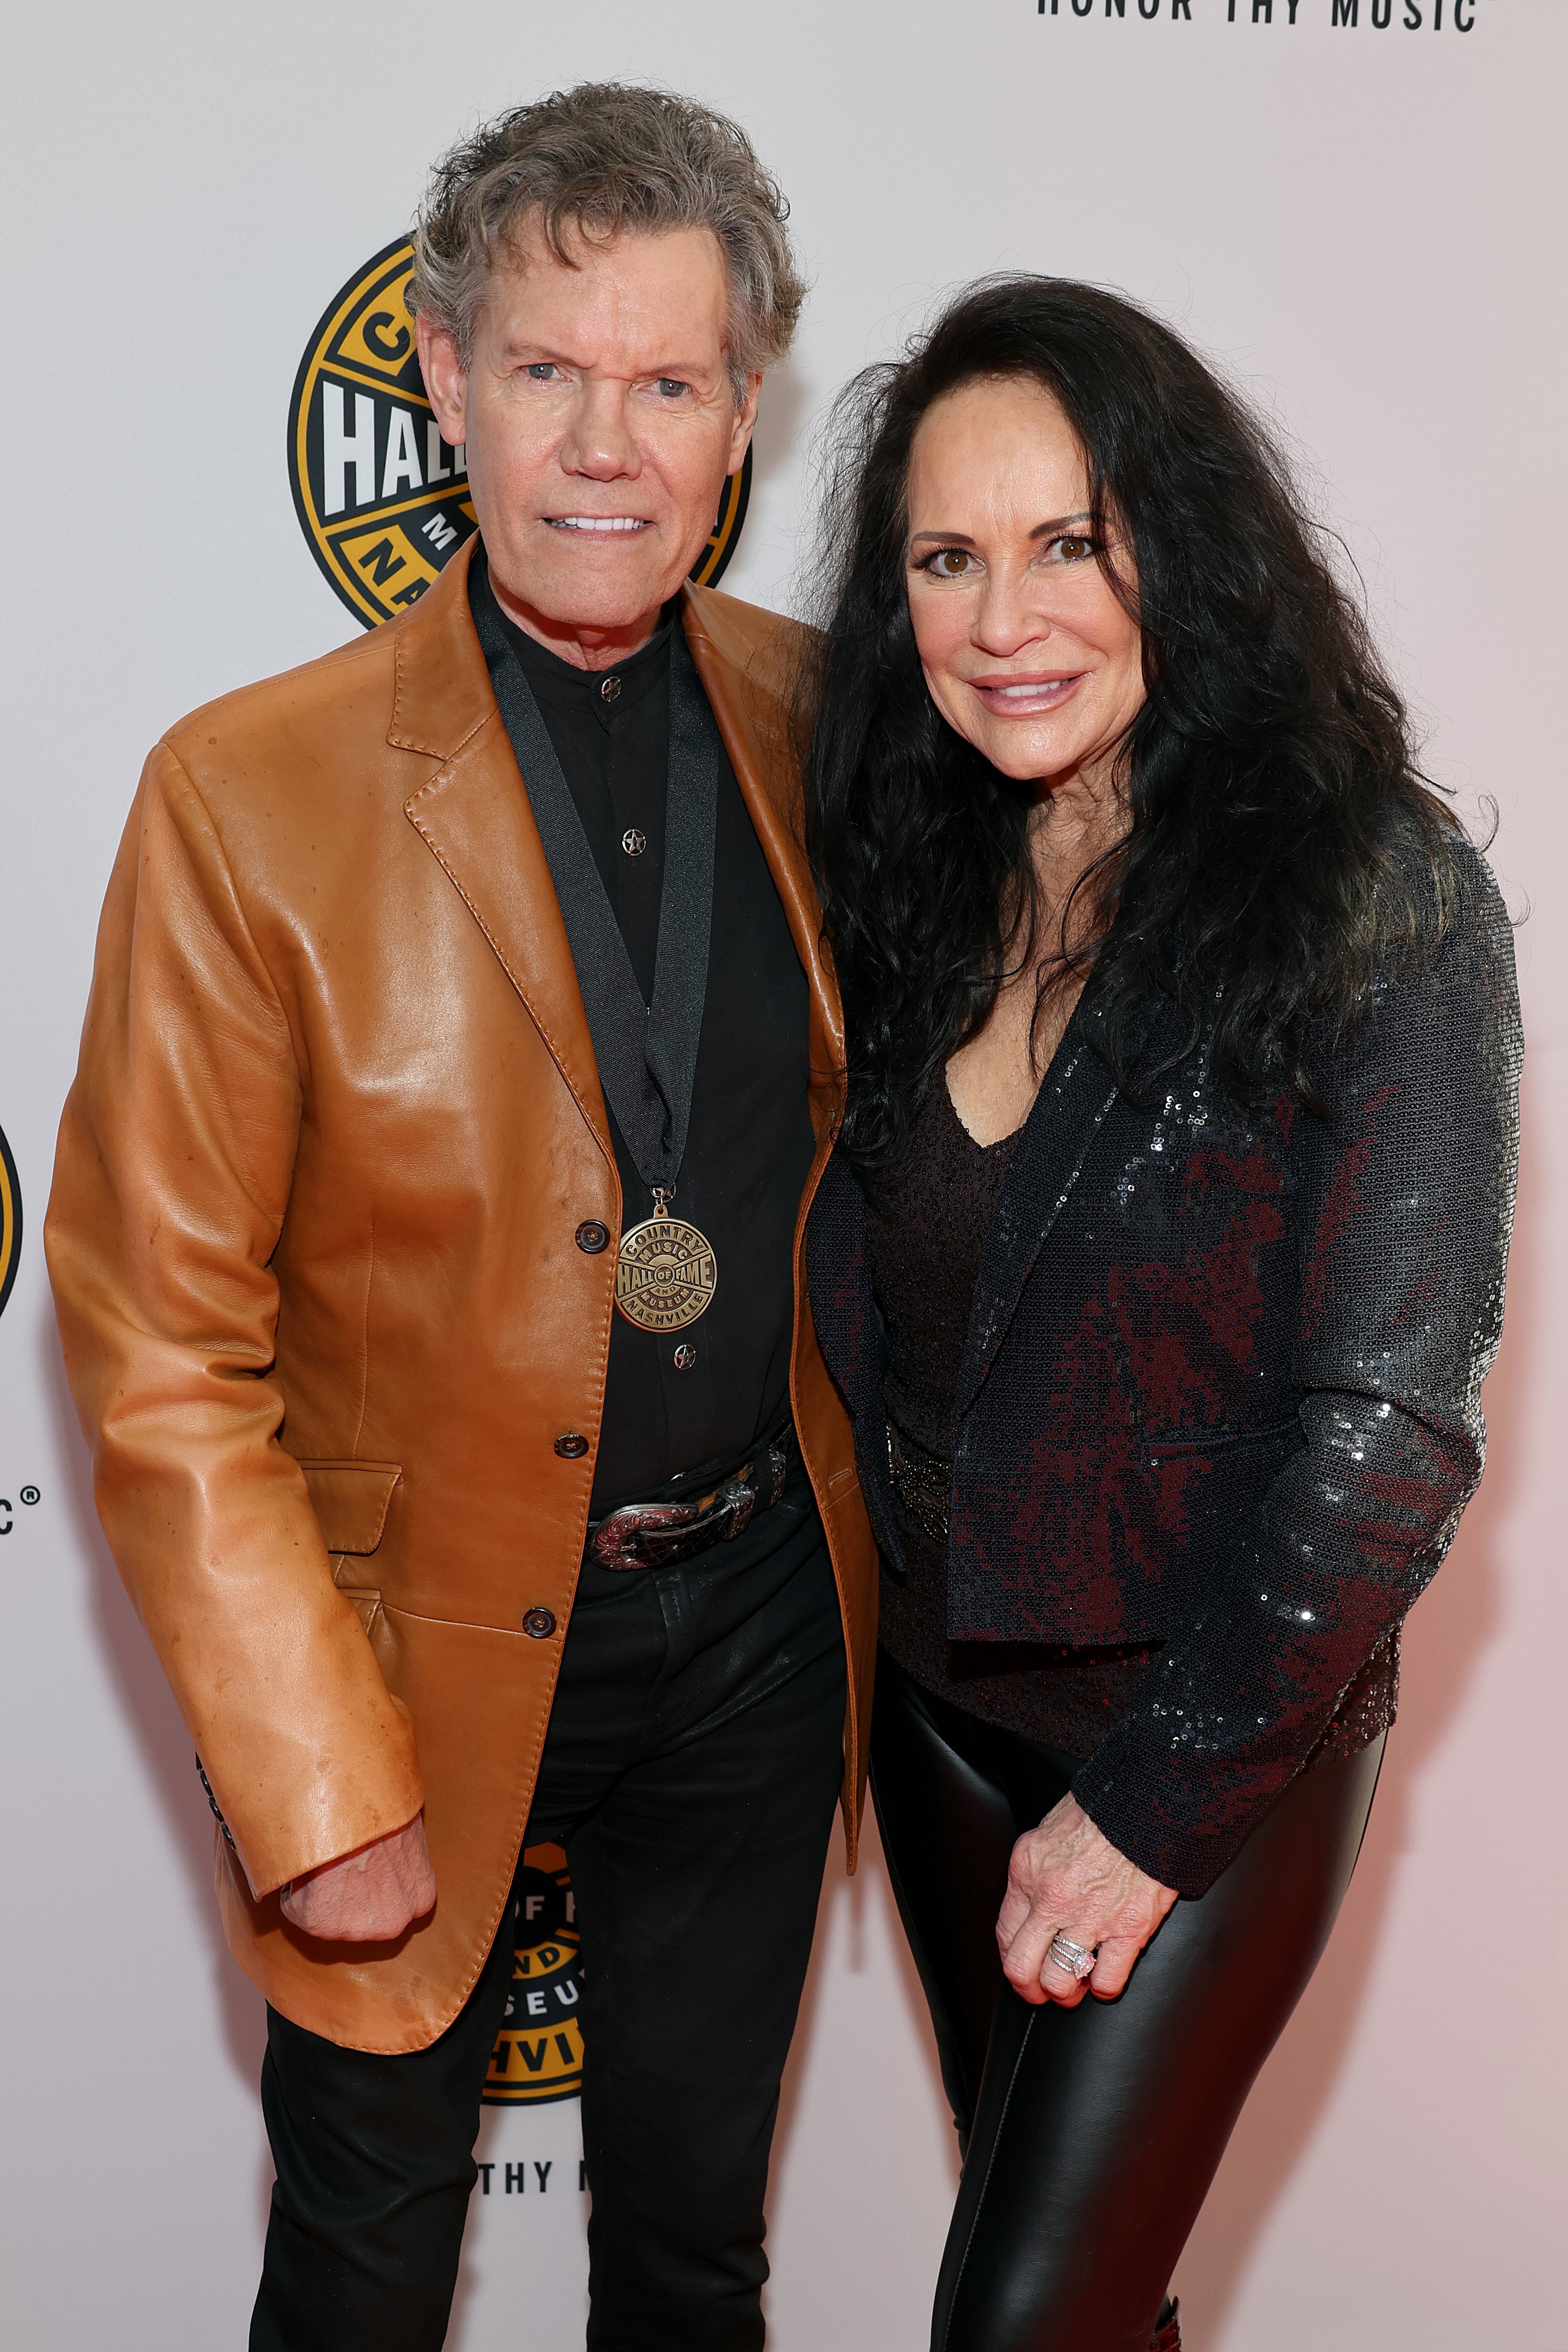 Randy Travis and Mary Beougher at the class of 2021 medallion ceremony on May 1, 2022, in Nashville | Source: Getty Images